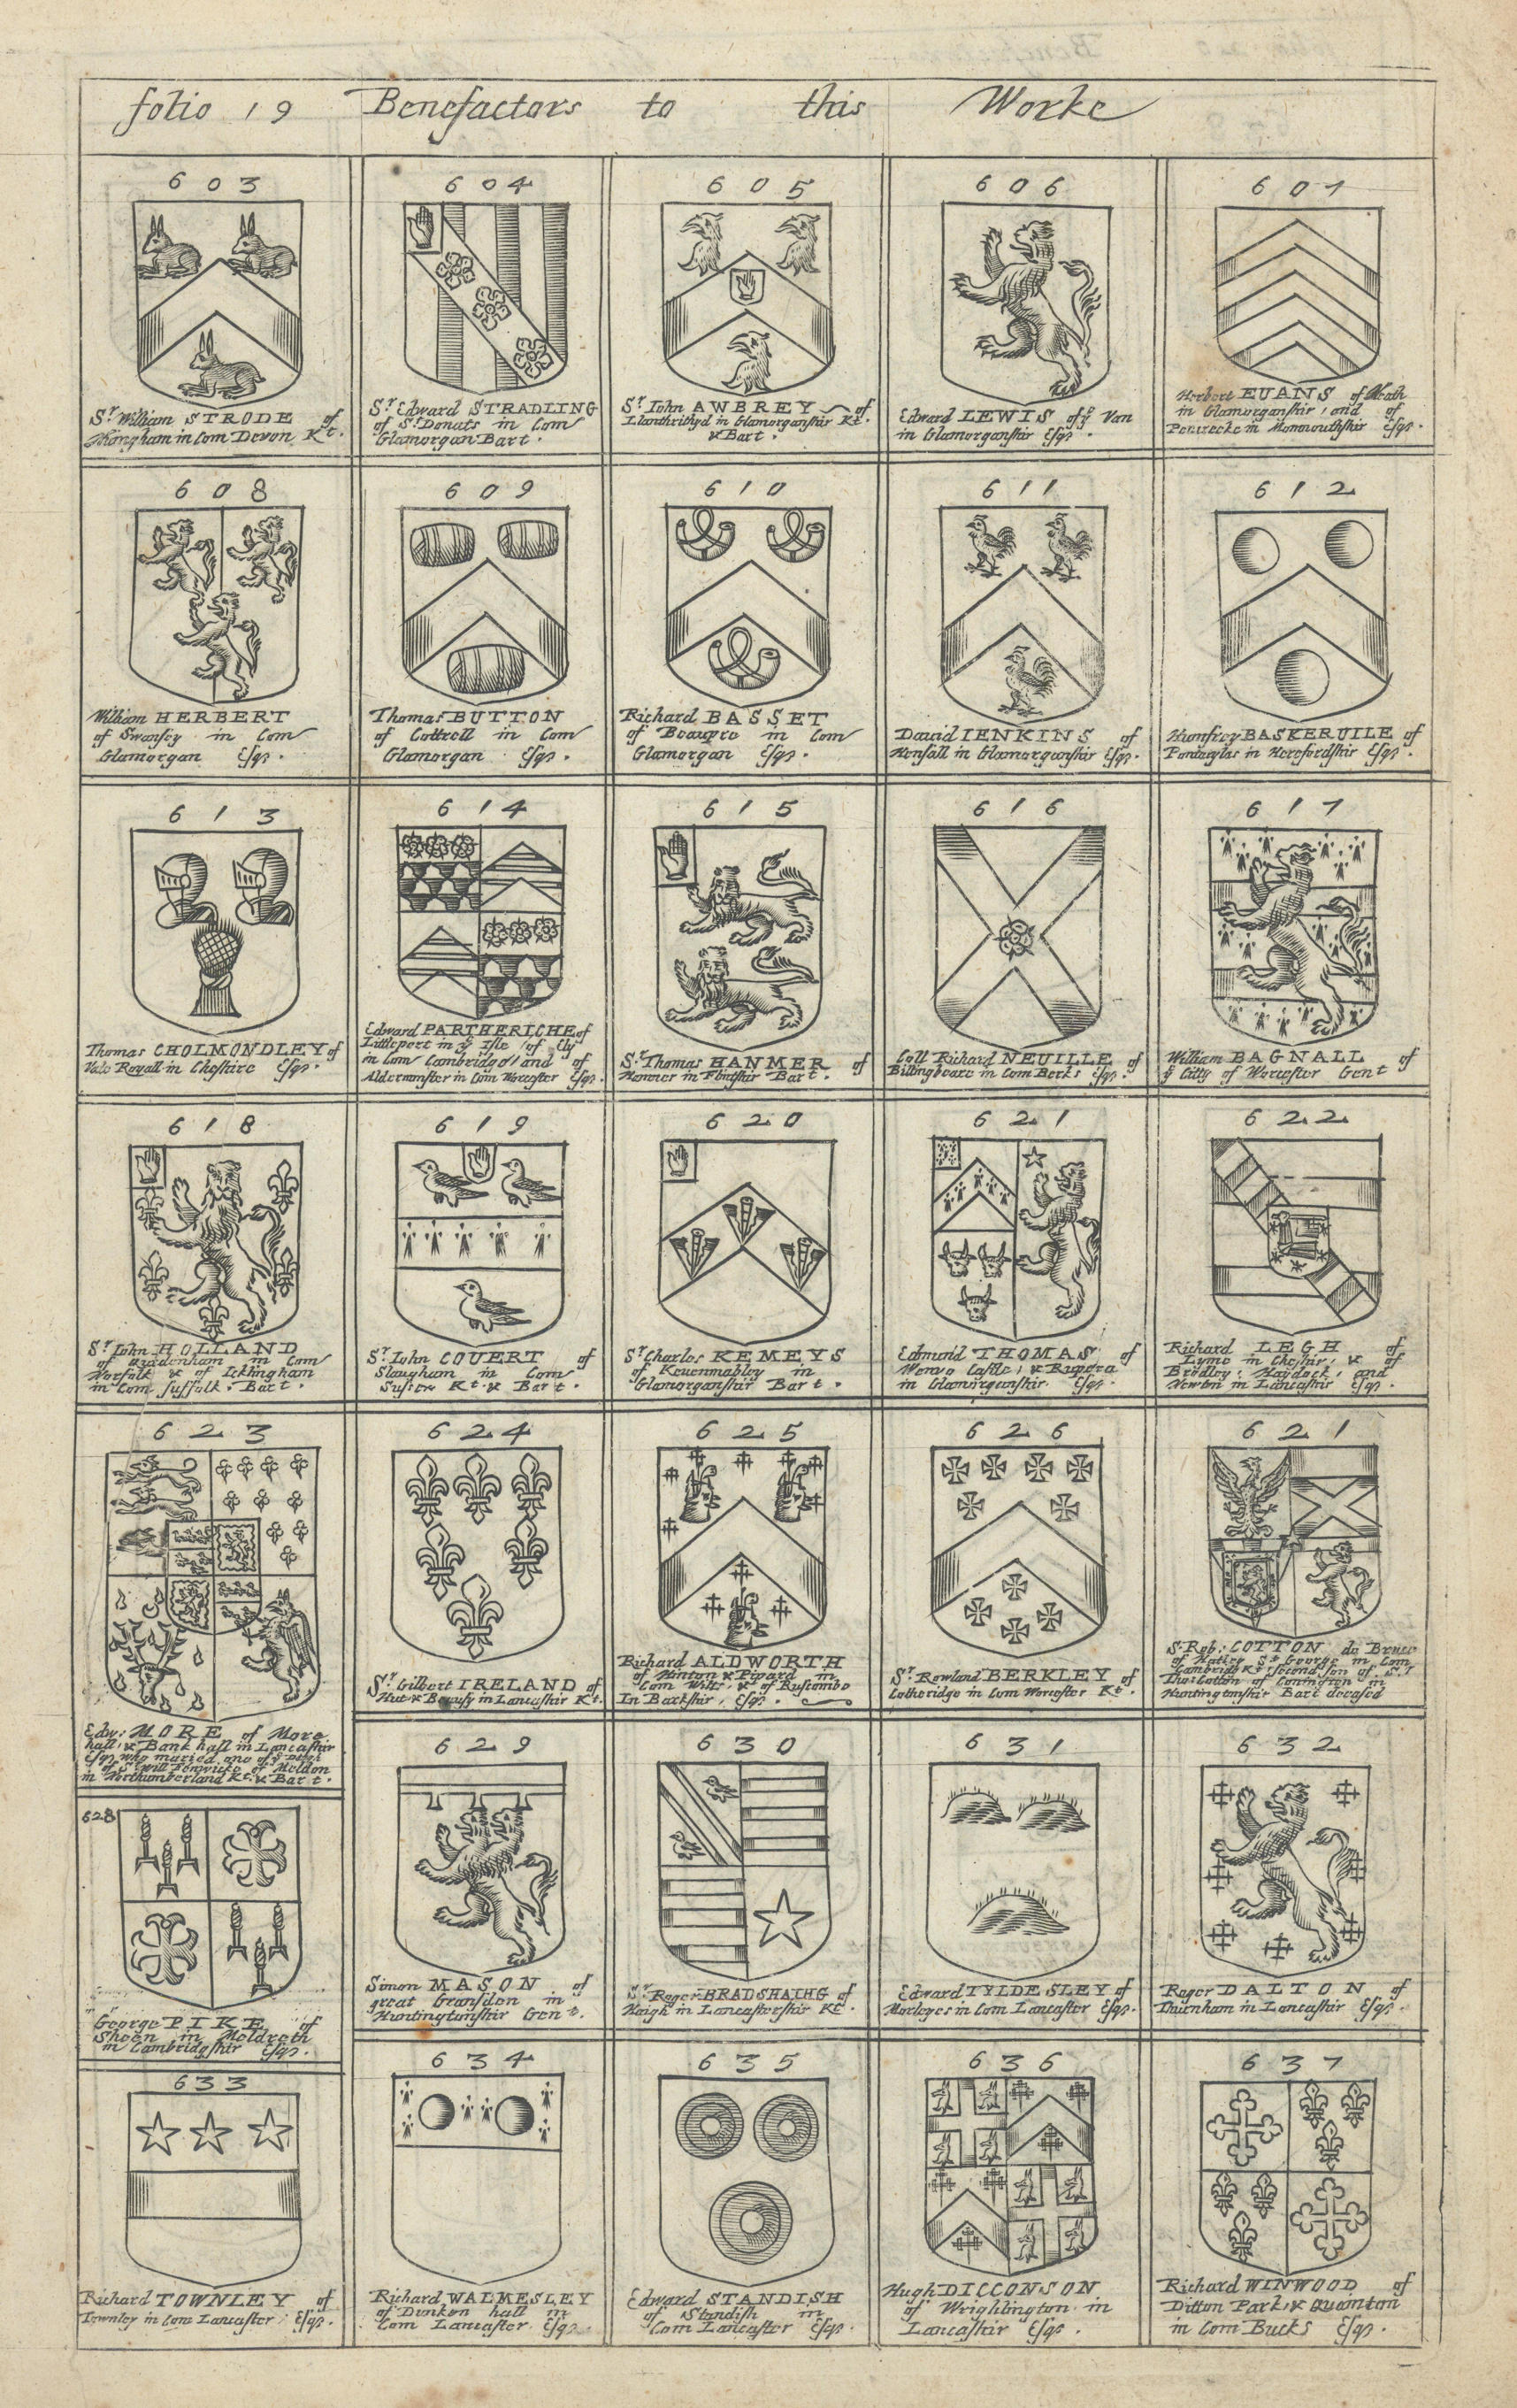 Associate Product Family coats of arms of benefactors to Blome's Britannia. Folio 19 #603-637 1673